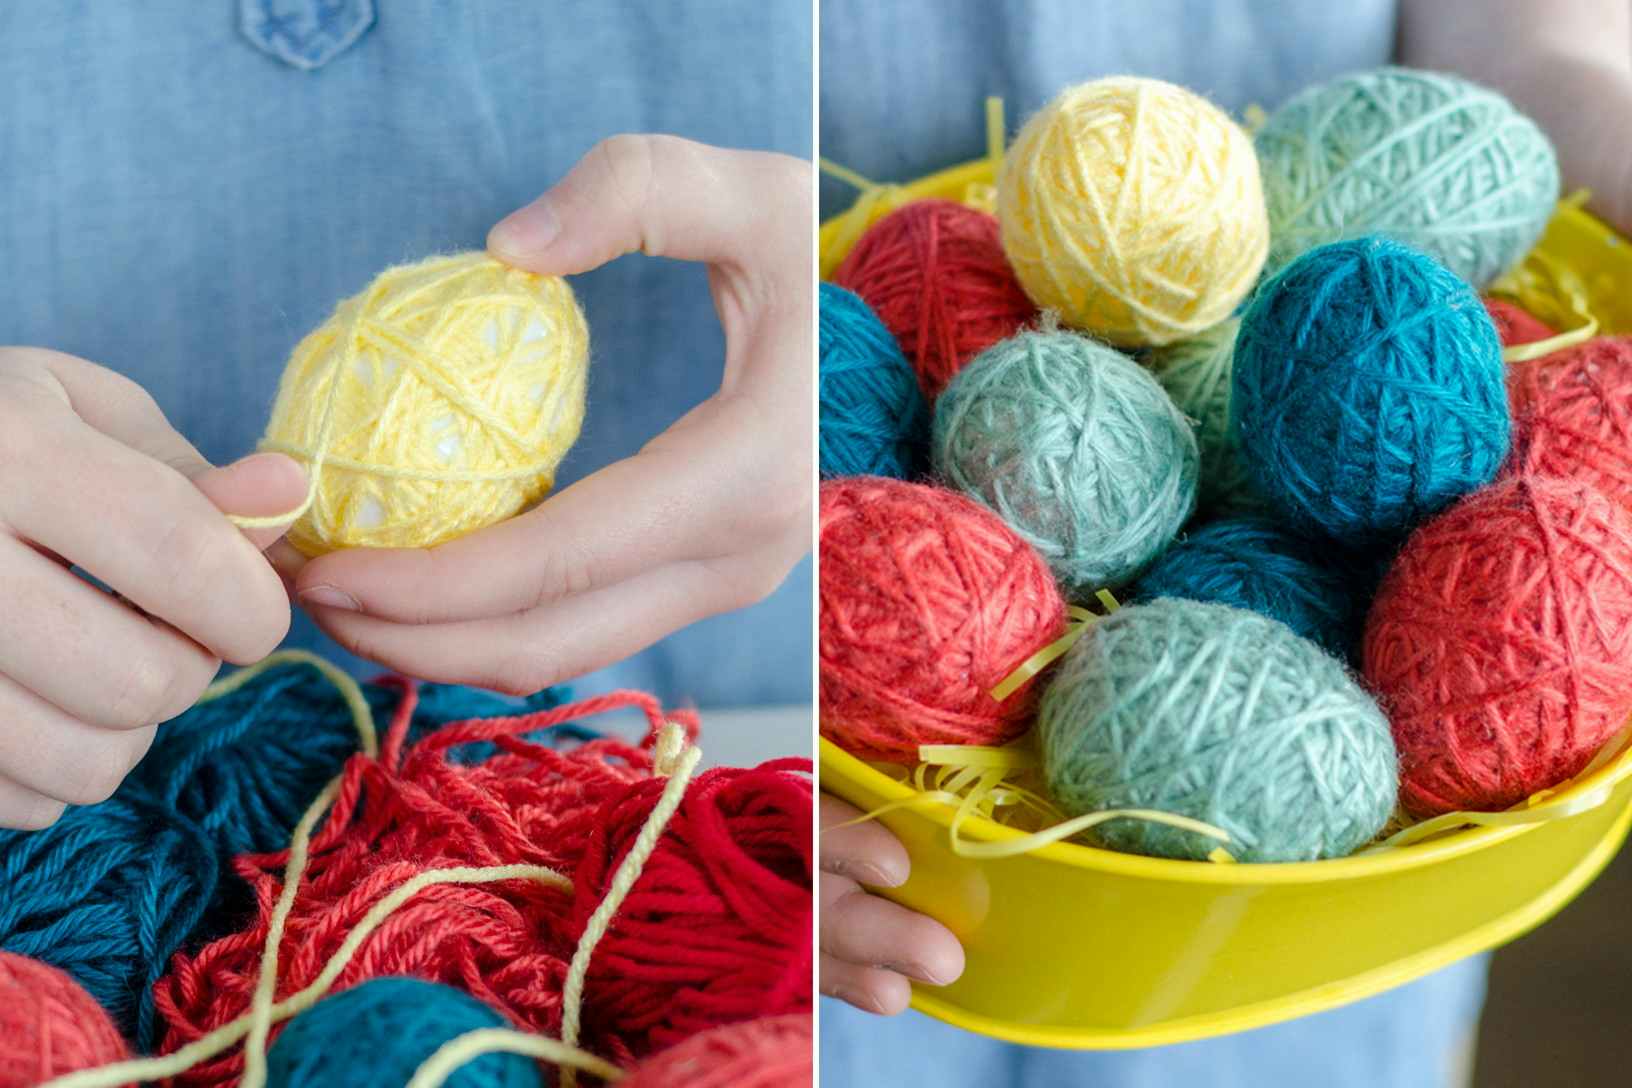 Wrap plastic Easter eggs in yarn for colorful decor.